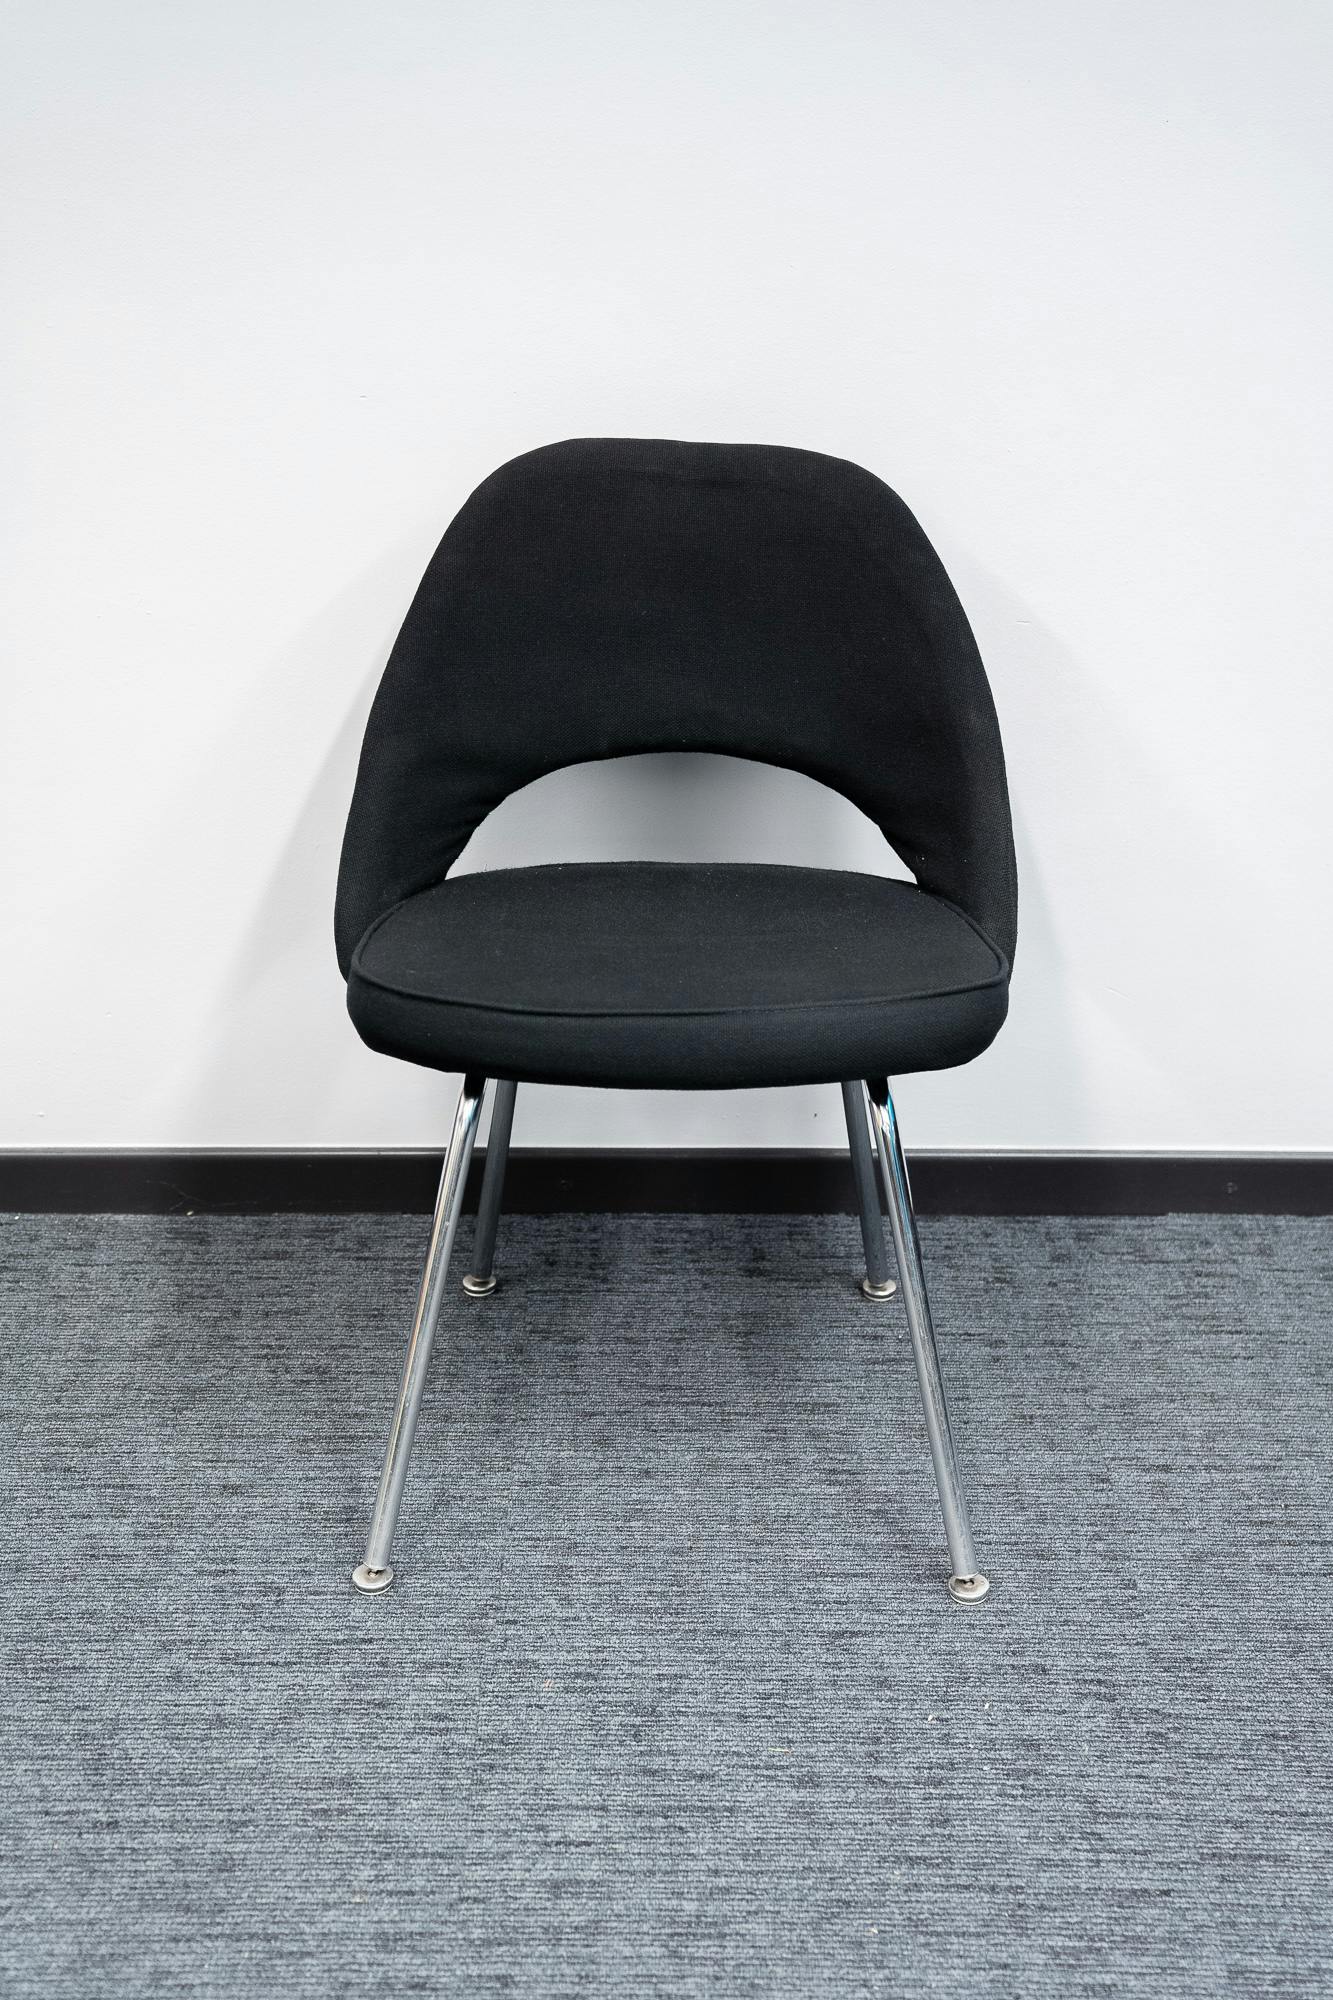 Black fabric chair with aluminum legs - Second hand quality "Office chairs" - Relieve Furniture